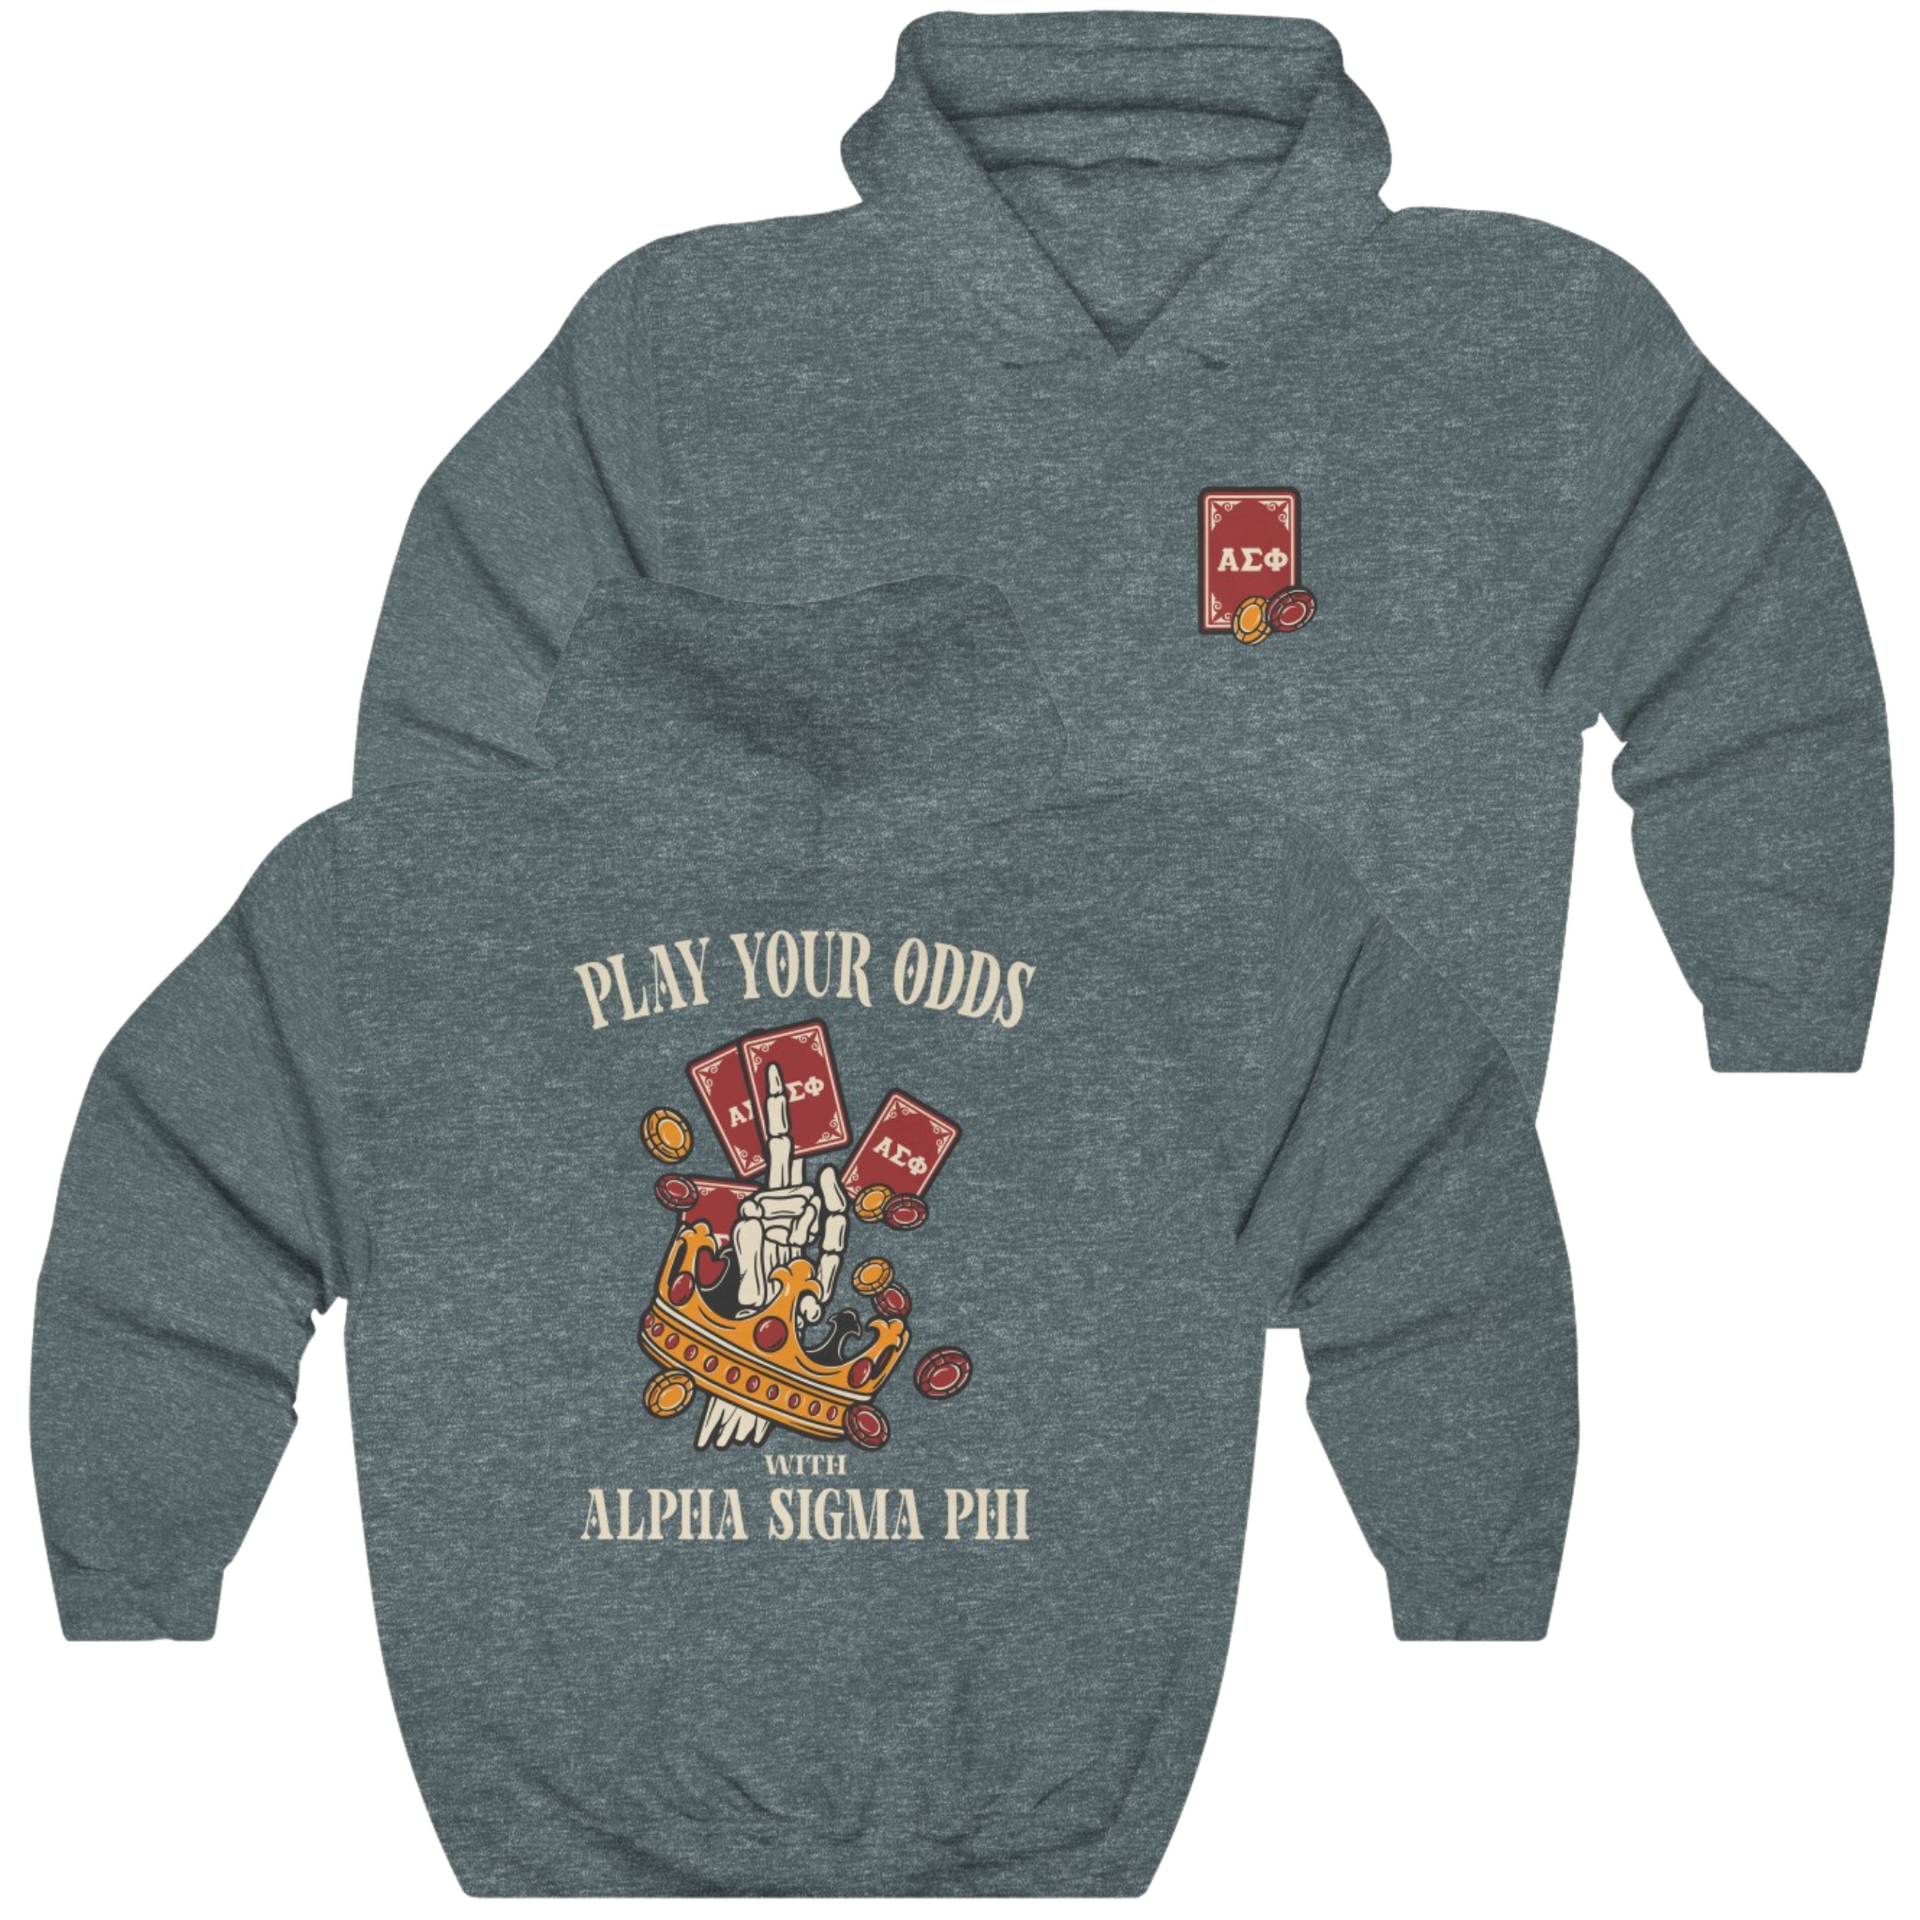 Grey Alpha Sigma Phi Graphic Hoodie | Play Your Odds | Alpha Sigma Phi Fraternity Hoodie 